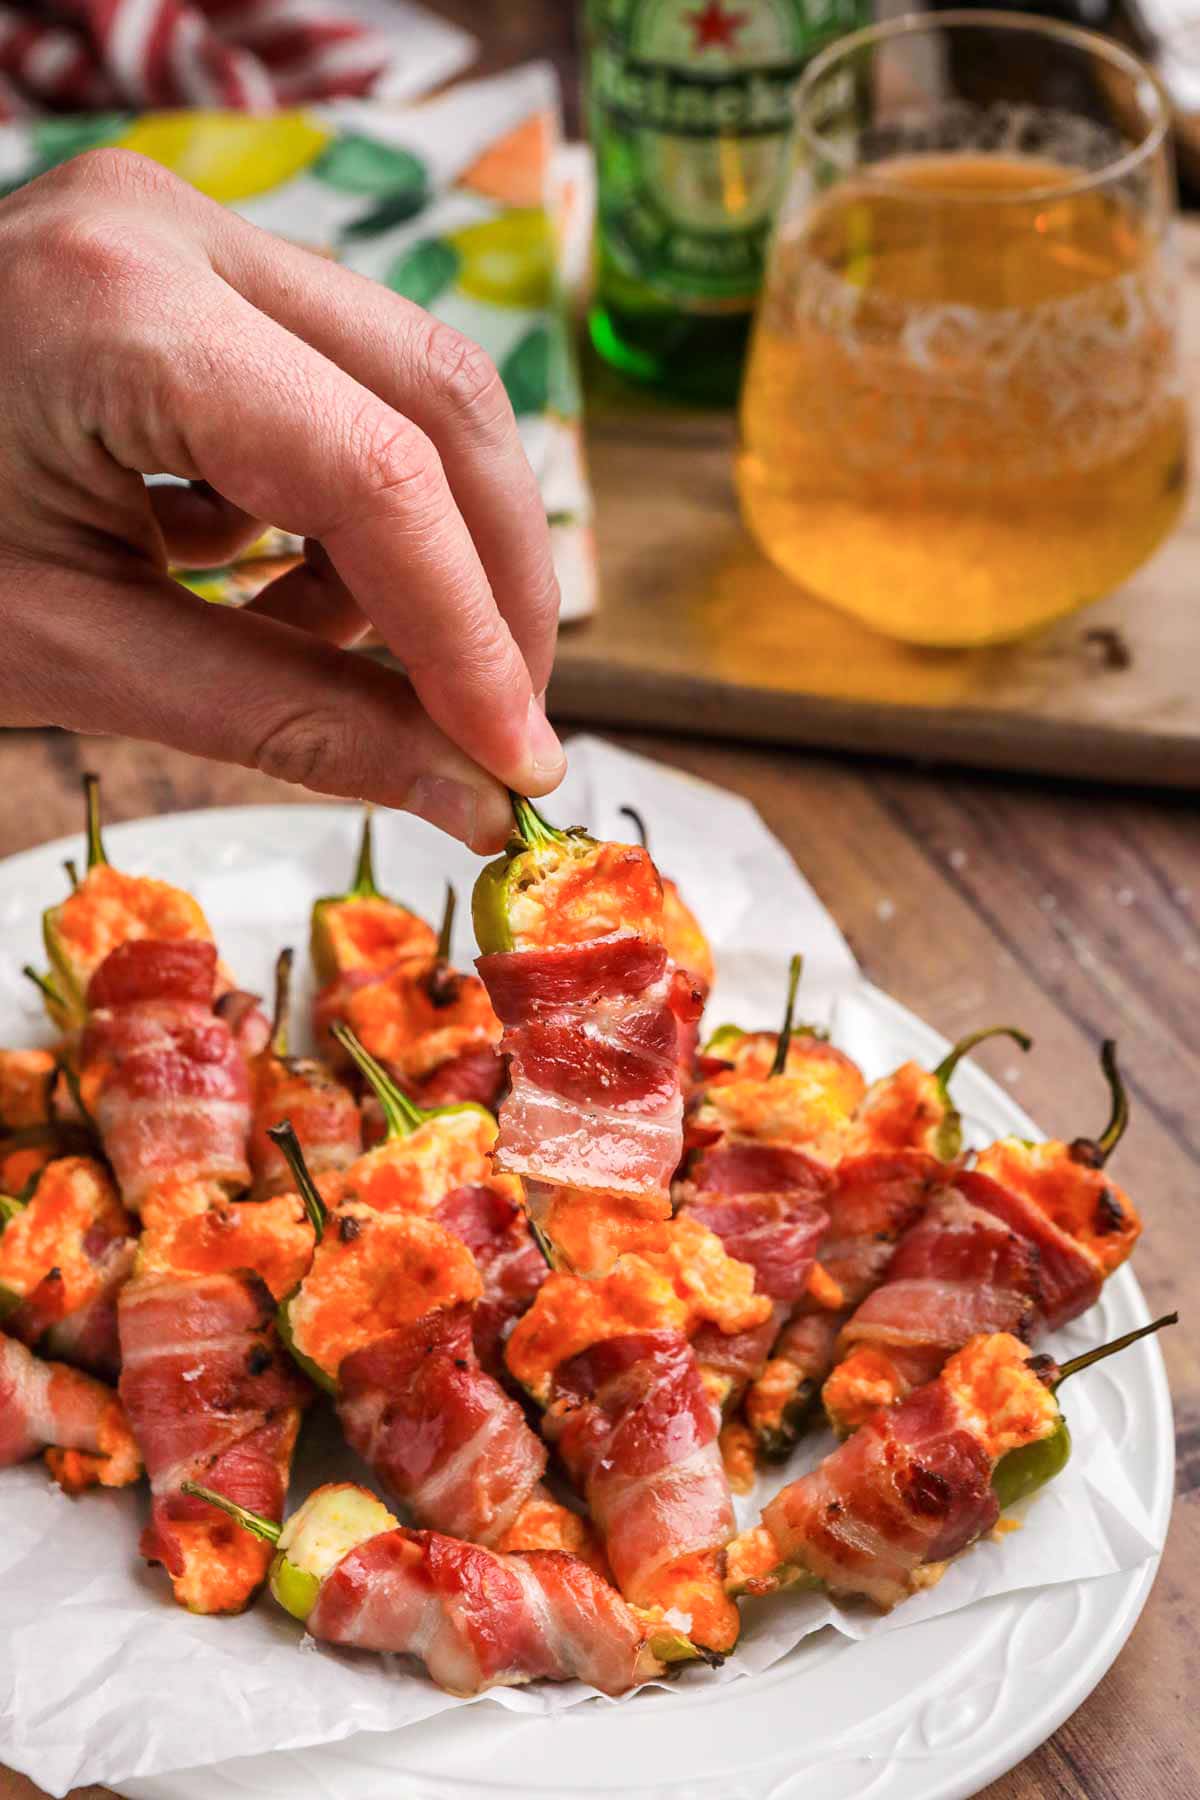 Bacon Jalapeno Poppers finished on plate and hand holding one pepper